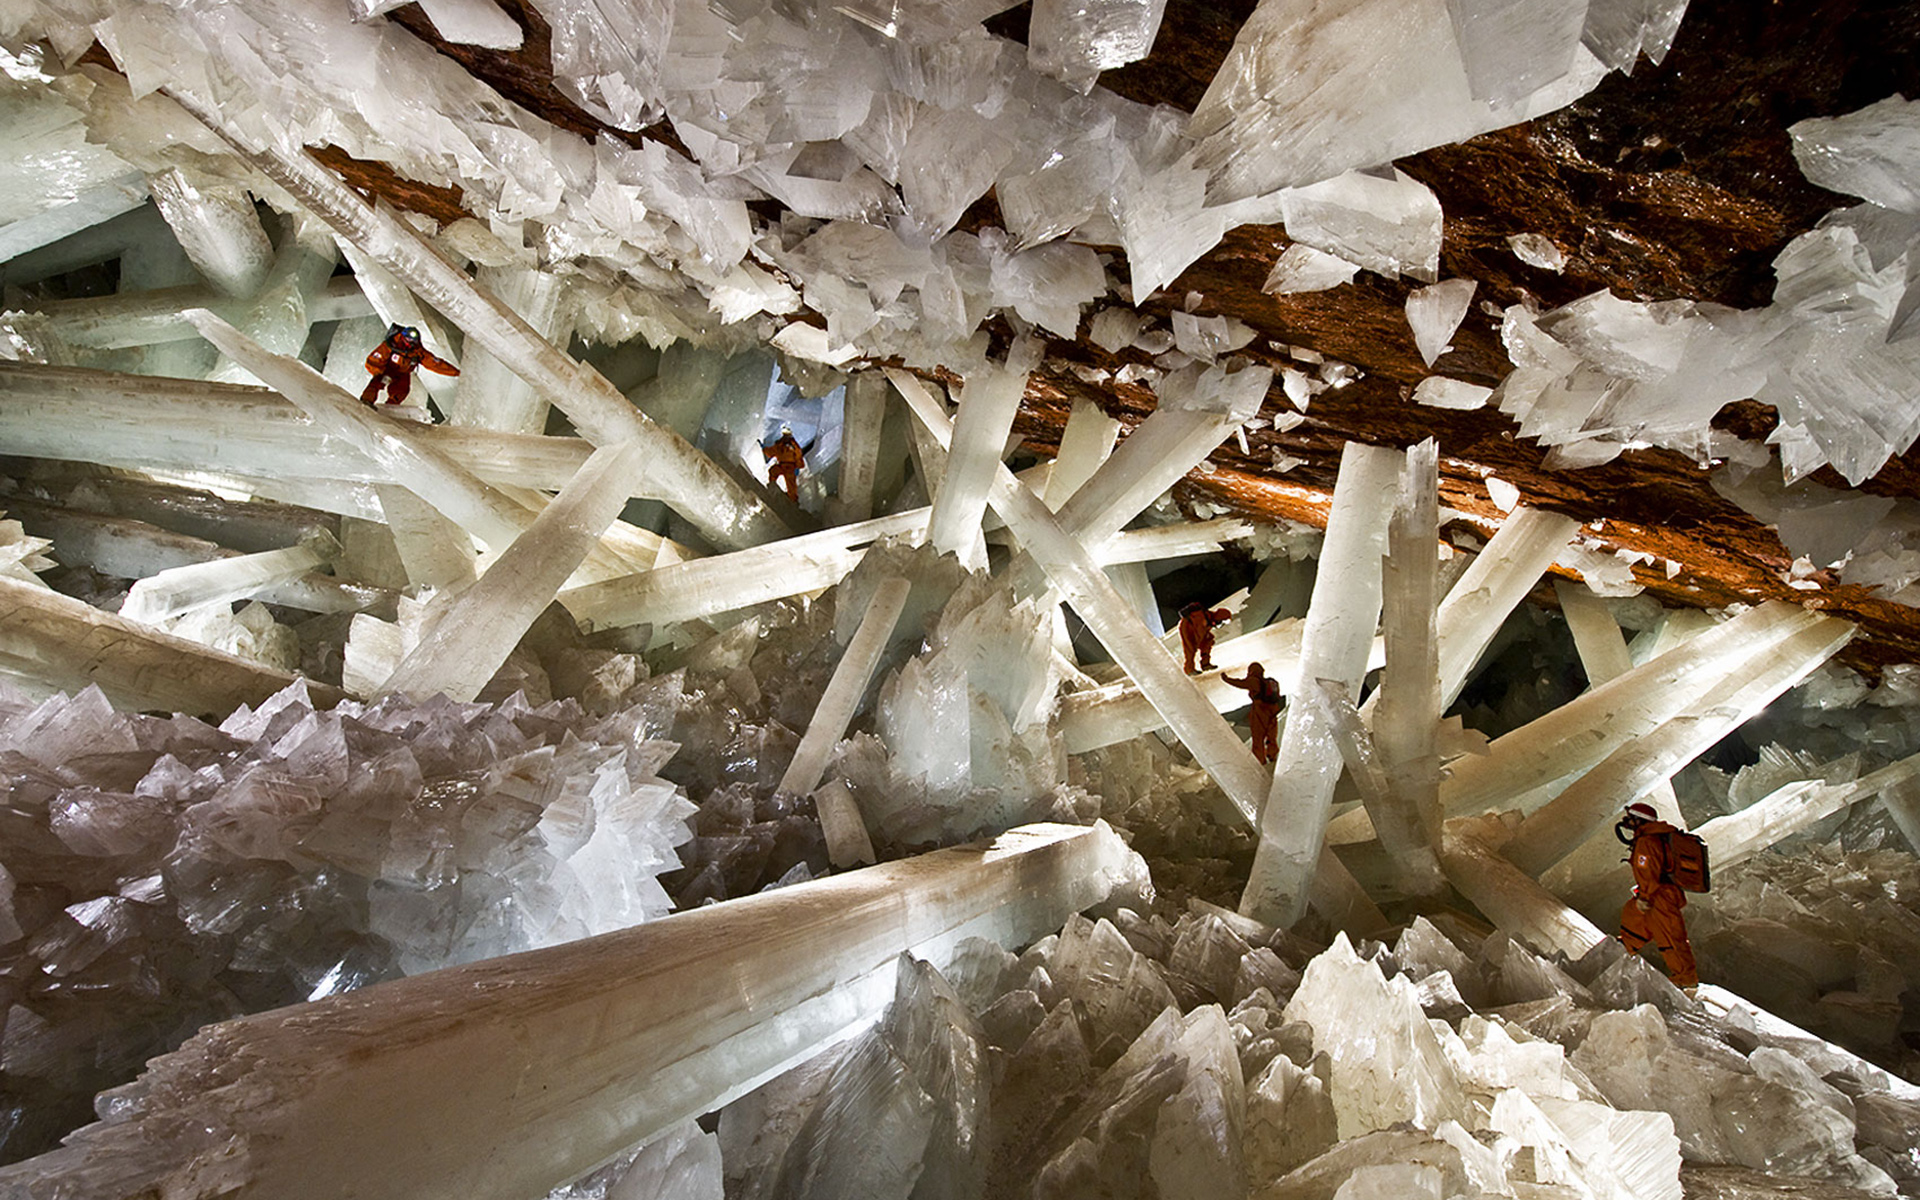 The Cave of giant crystals in Mexico